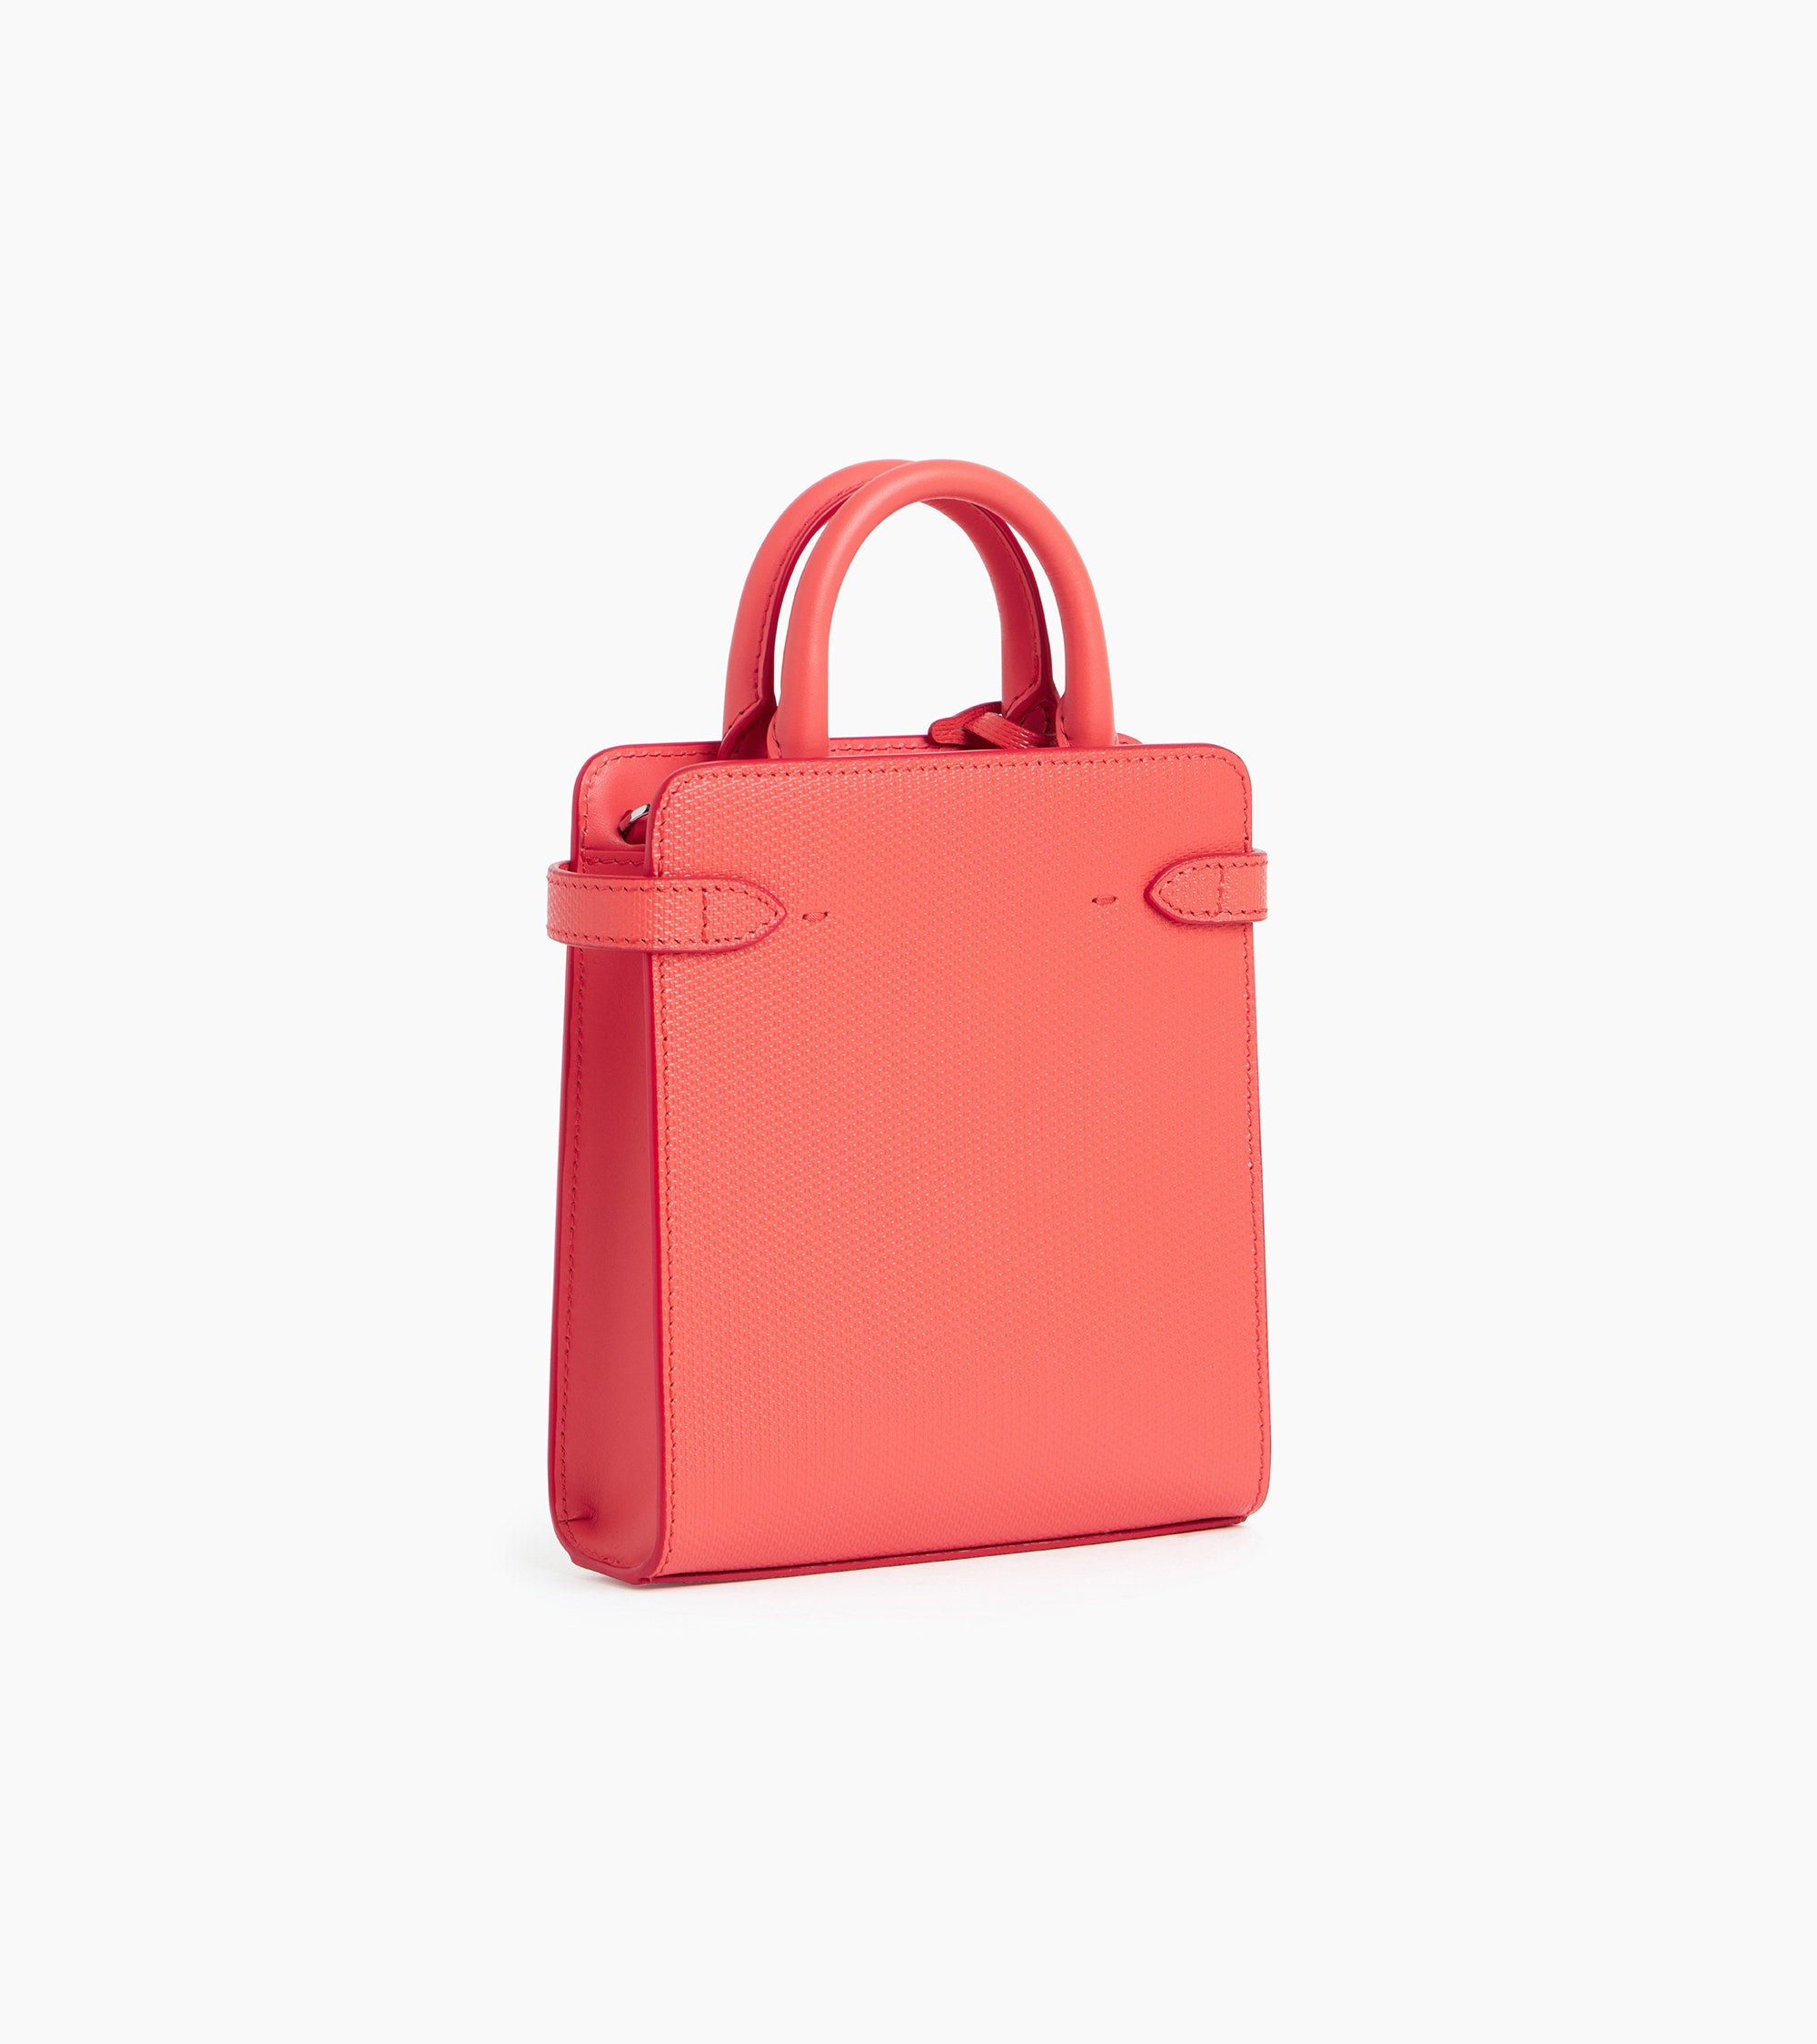 Emilie small vertical handbag in signature T leather